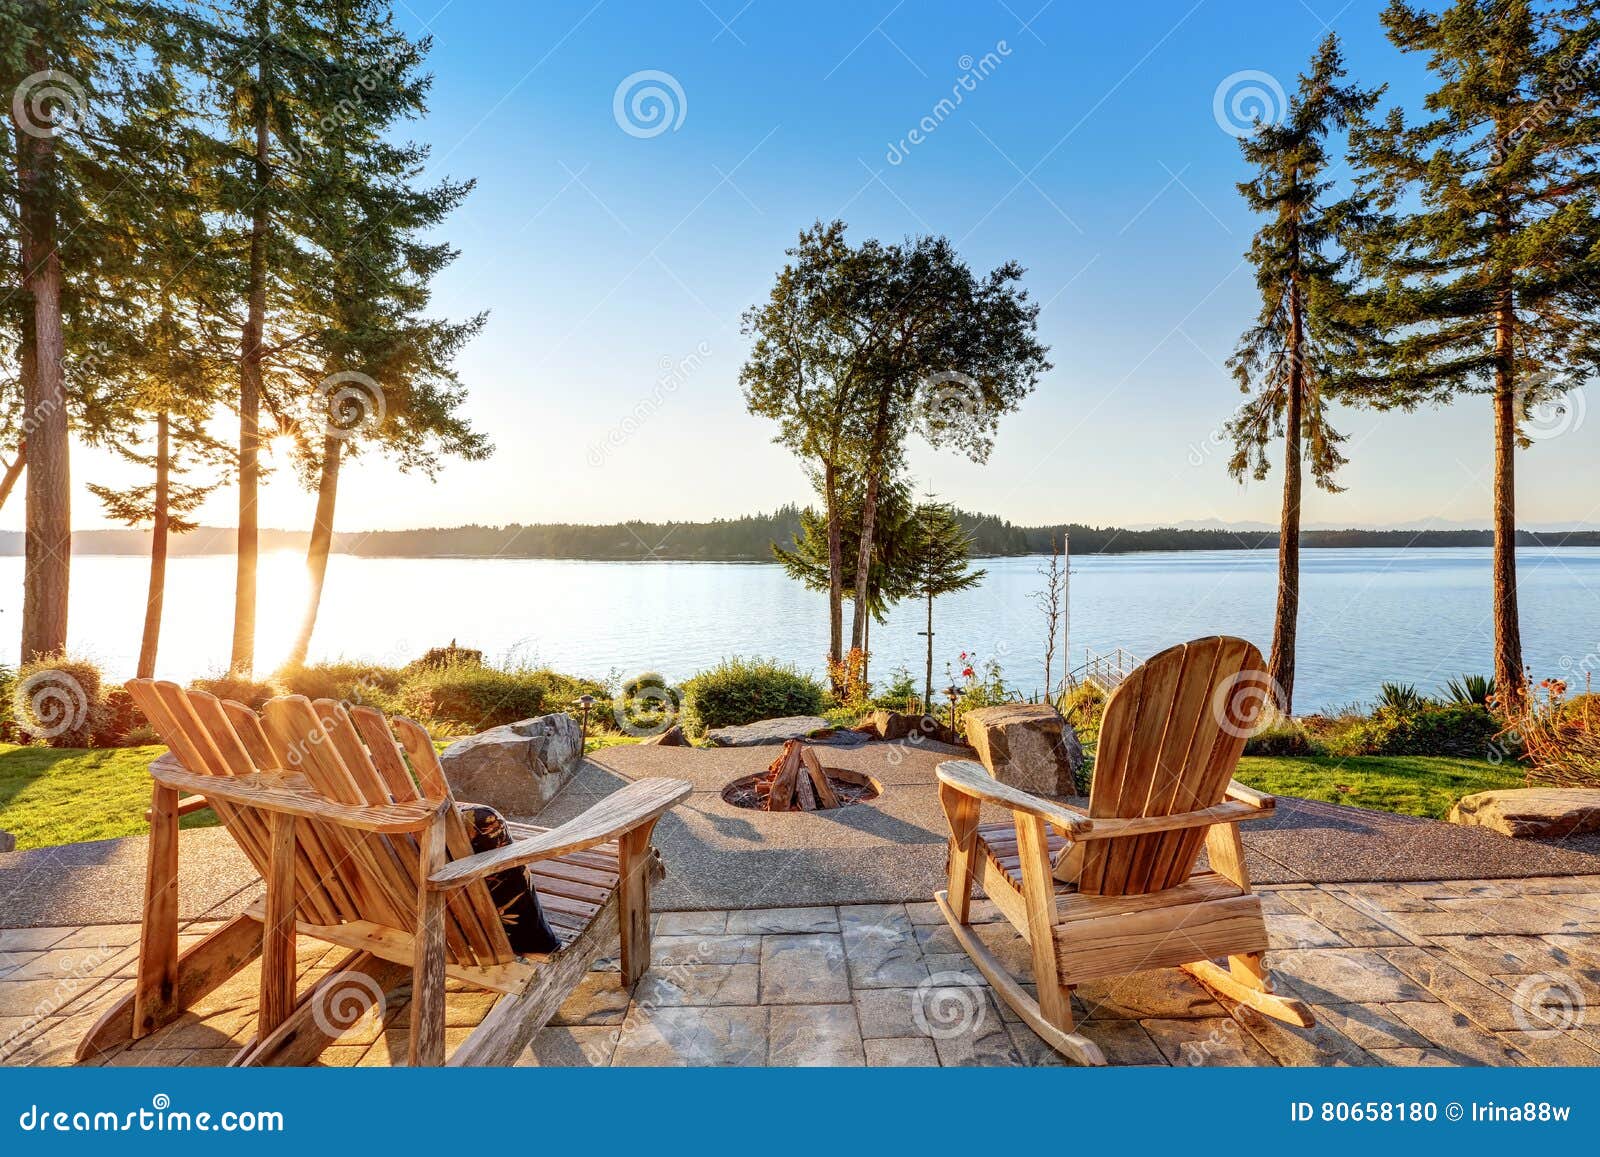 back yard of waterfront house with adirondack chairs and fire pit